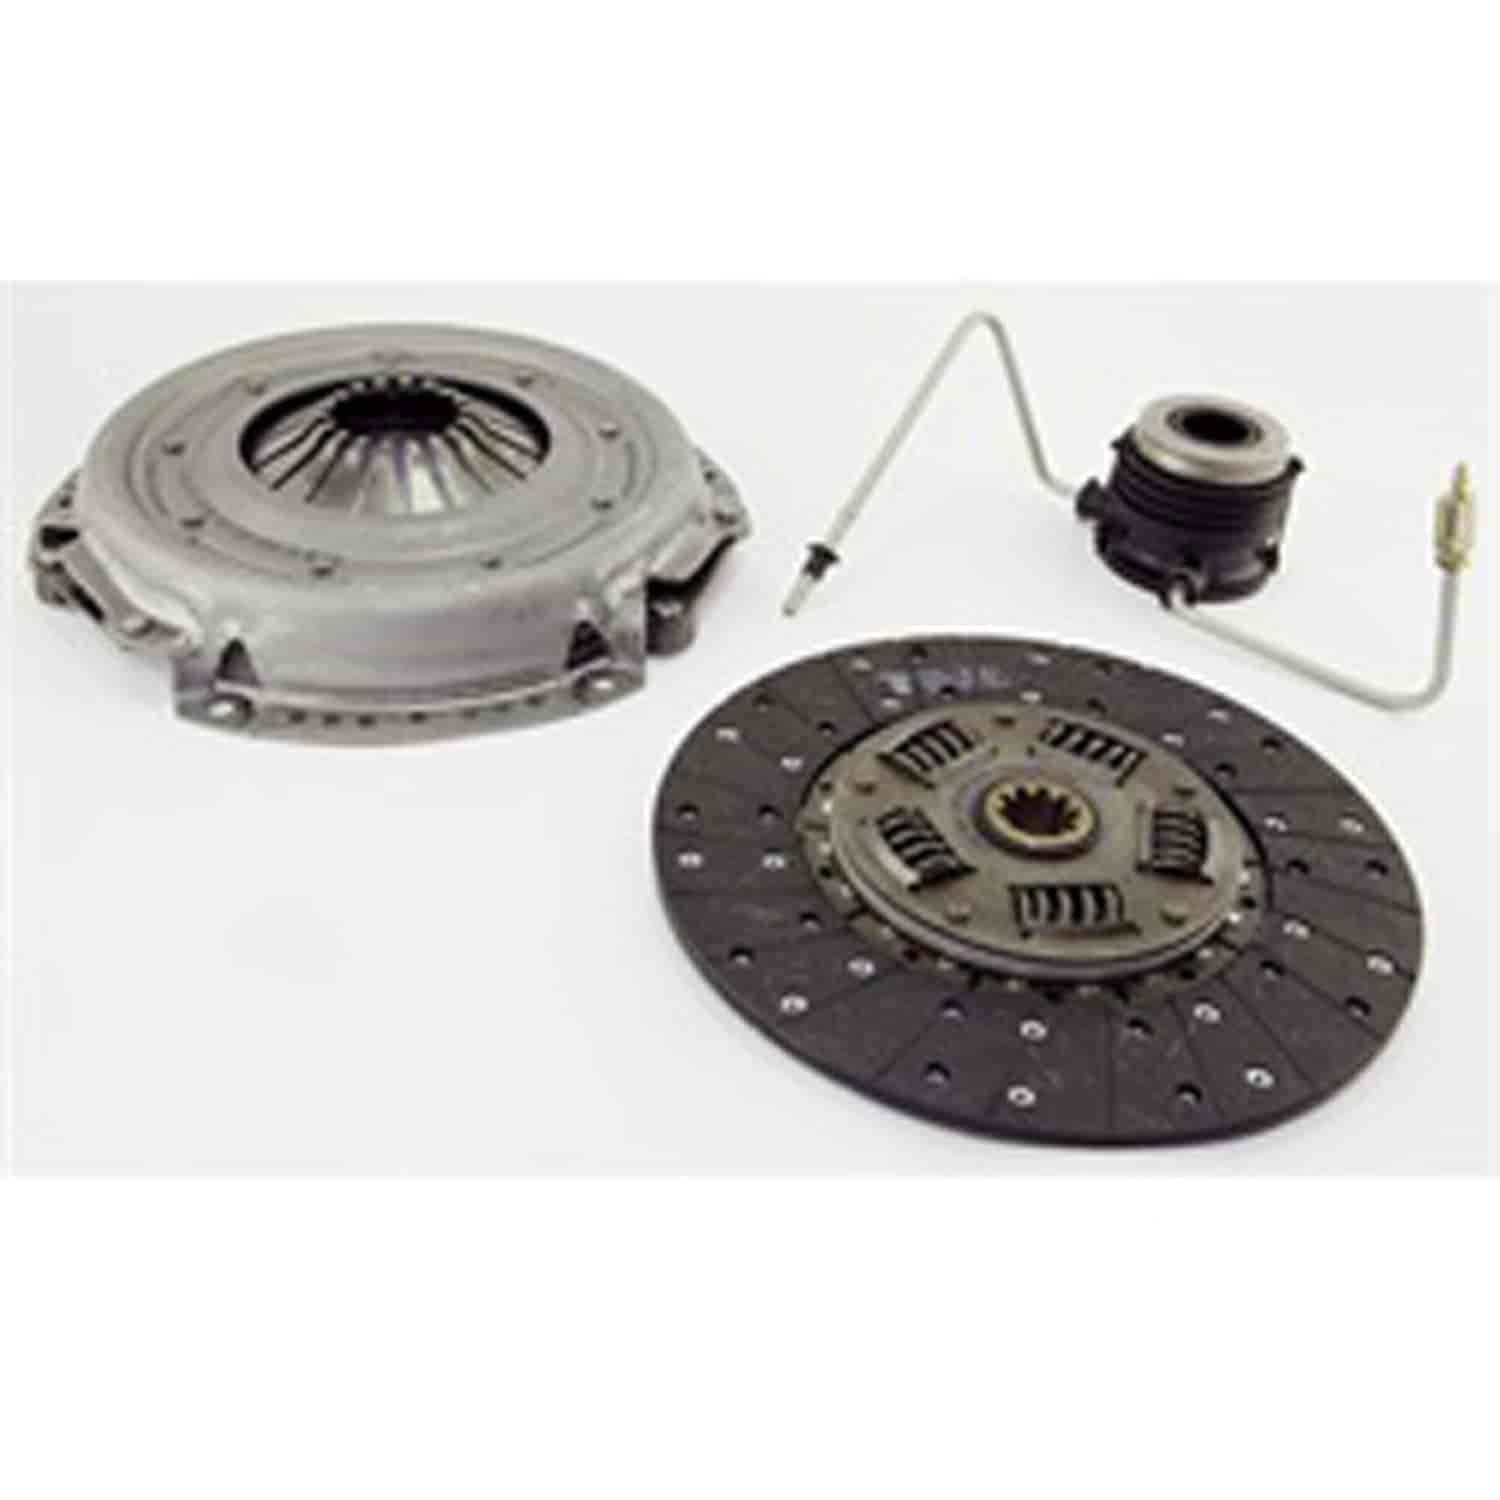 This regular clutch kit fits 1993 Jeep Cherokee and Wrangler with a 4.0L. This kit includes the pres